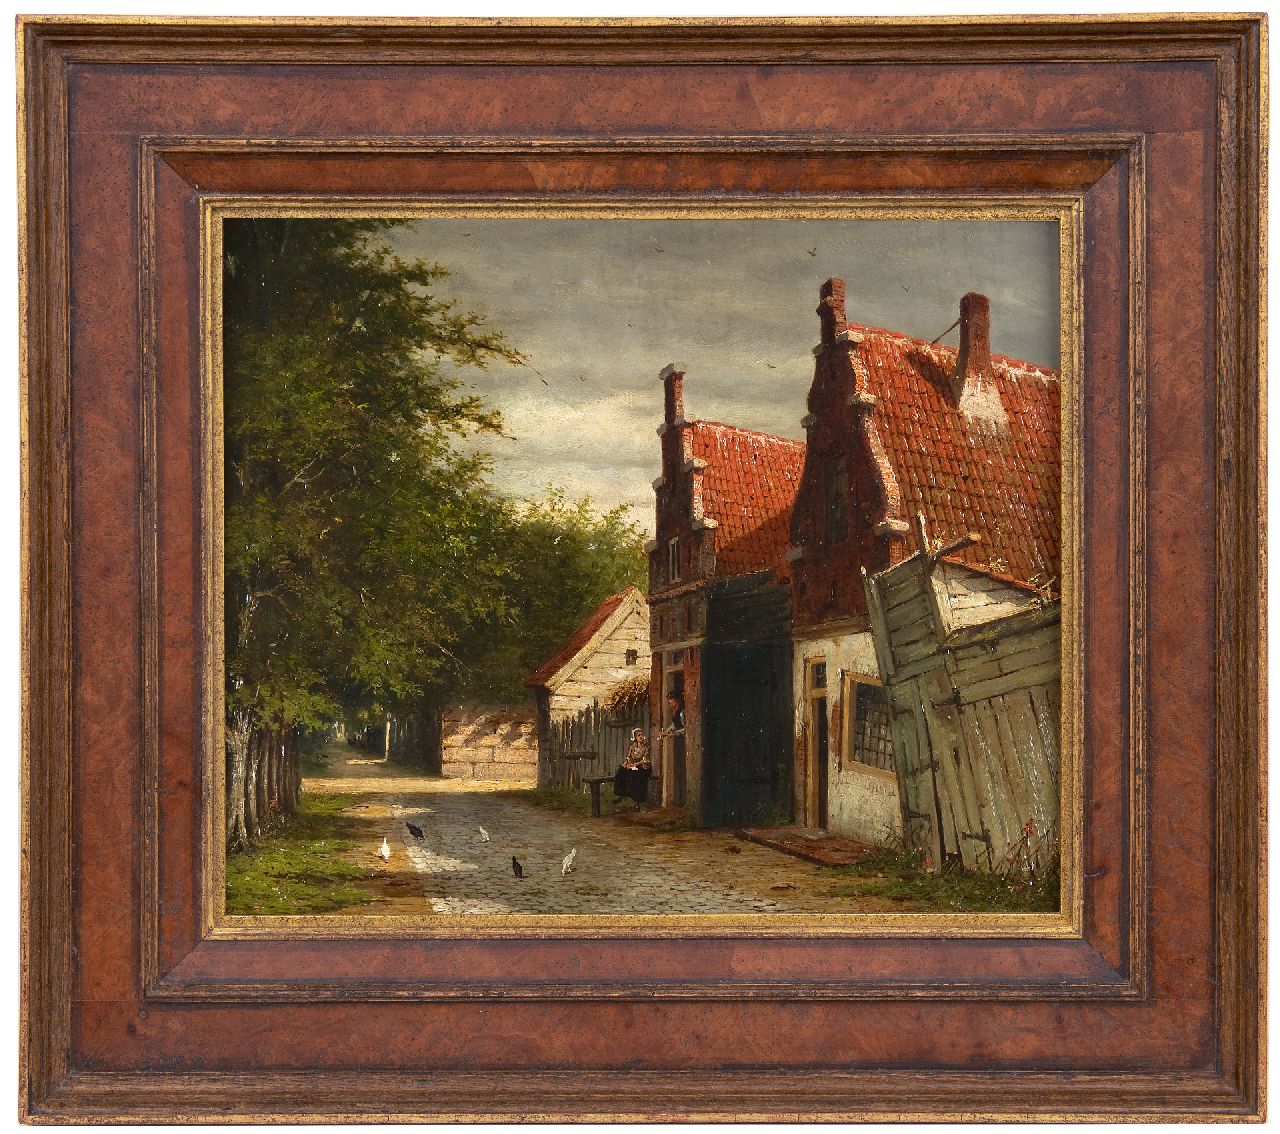 Mittertreiner J.J.  | Johannes Jacobus Mittertreiner | Paintings offered for sale | A village street in summer, oil on painter's board 35.2 x 43.0 cm, signed l.r.